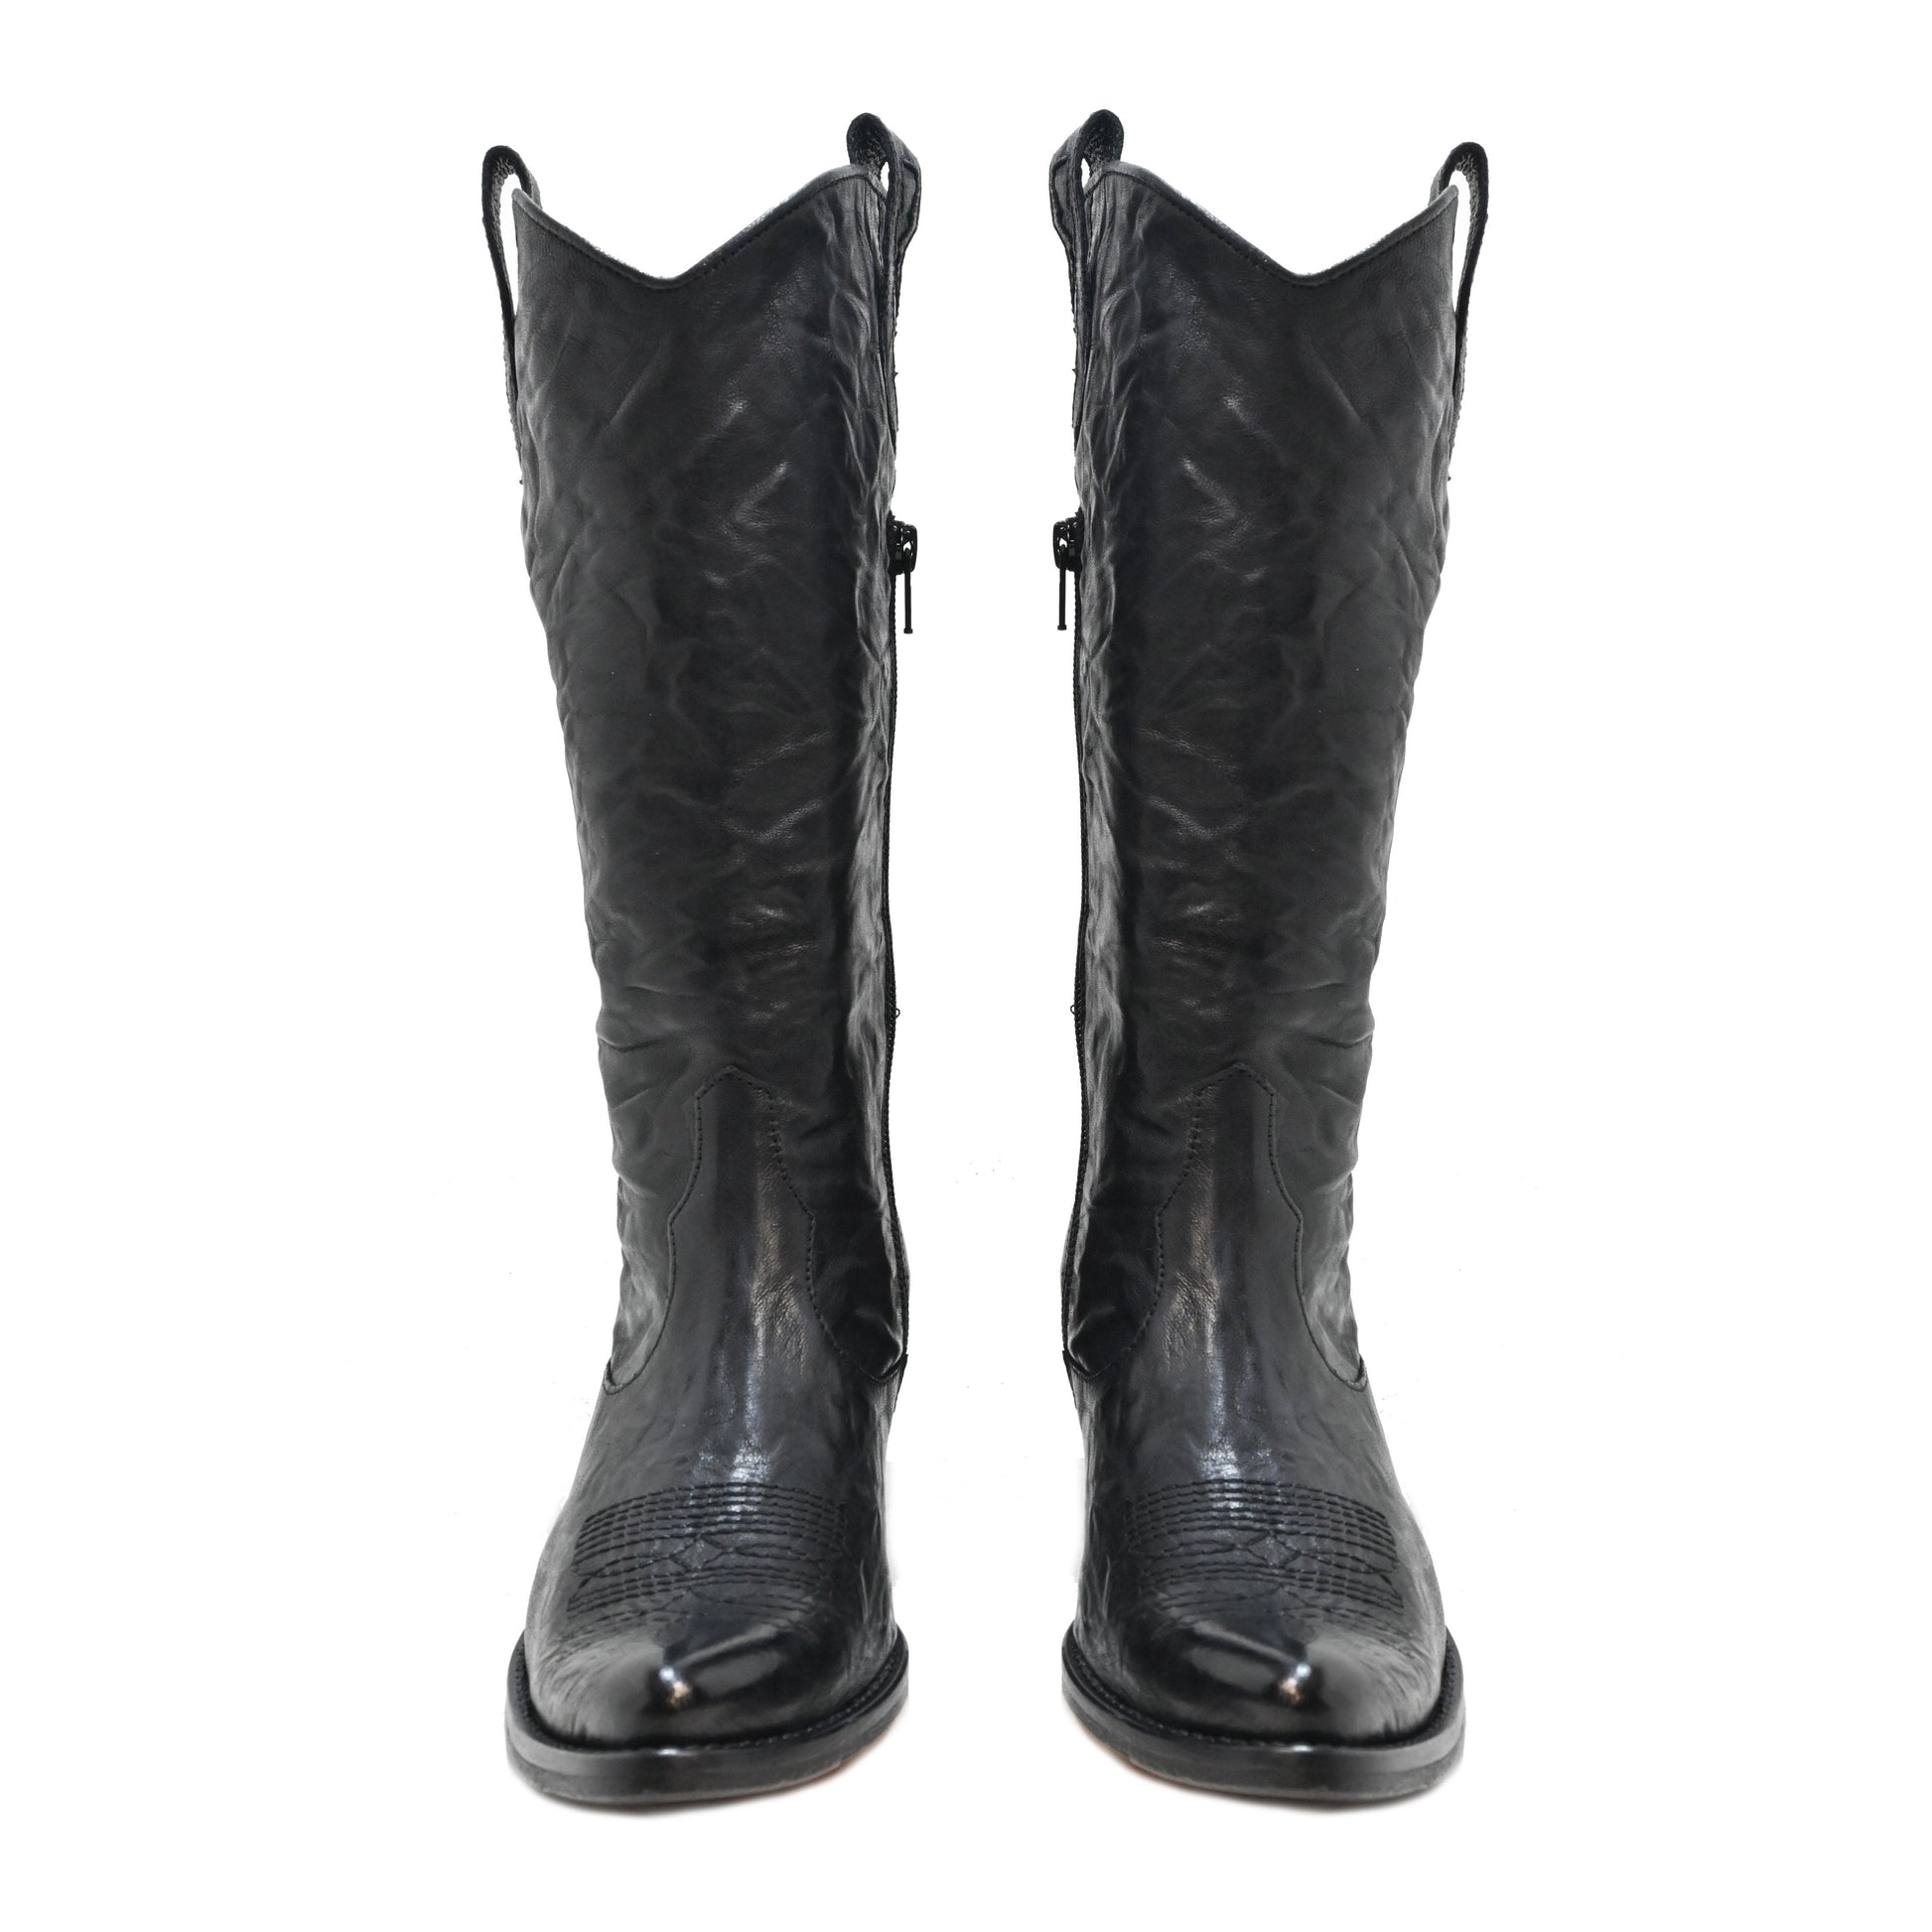 K2/12 - TEXAS BOOT - leather BLACK - History541